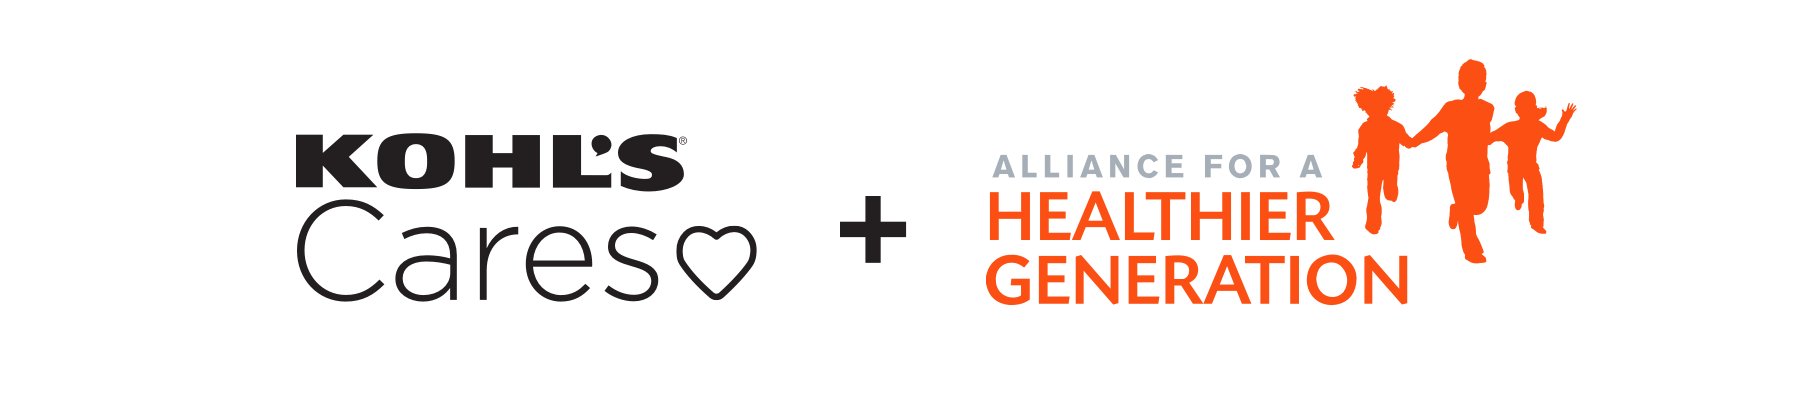 Kohl's Cares and Alliance for a Healthier Generation